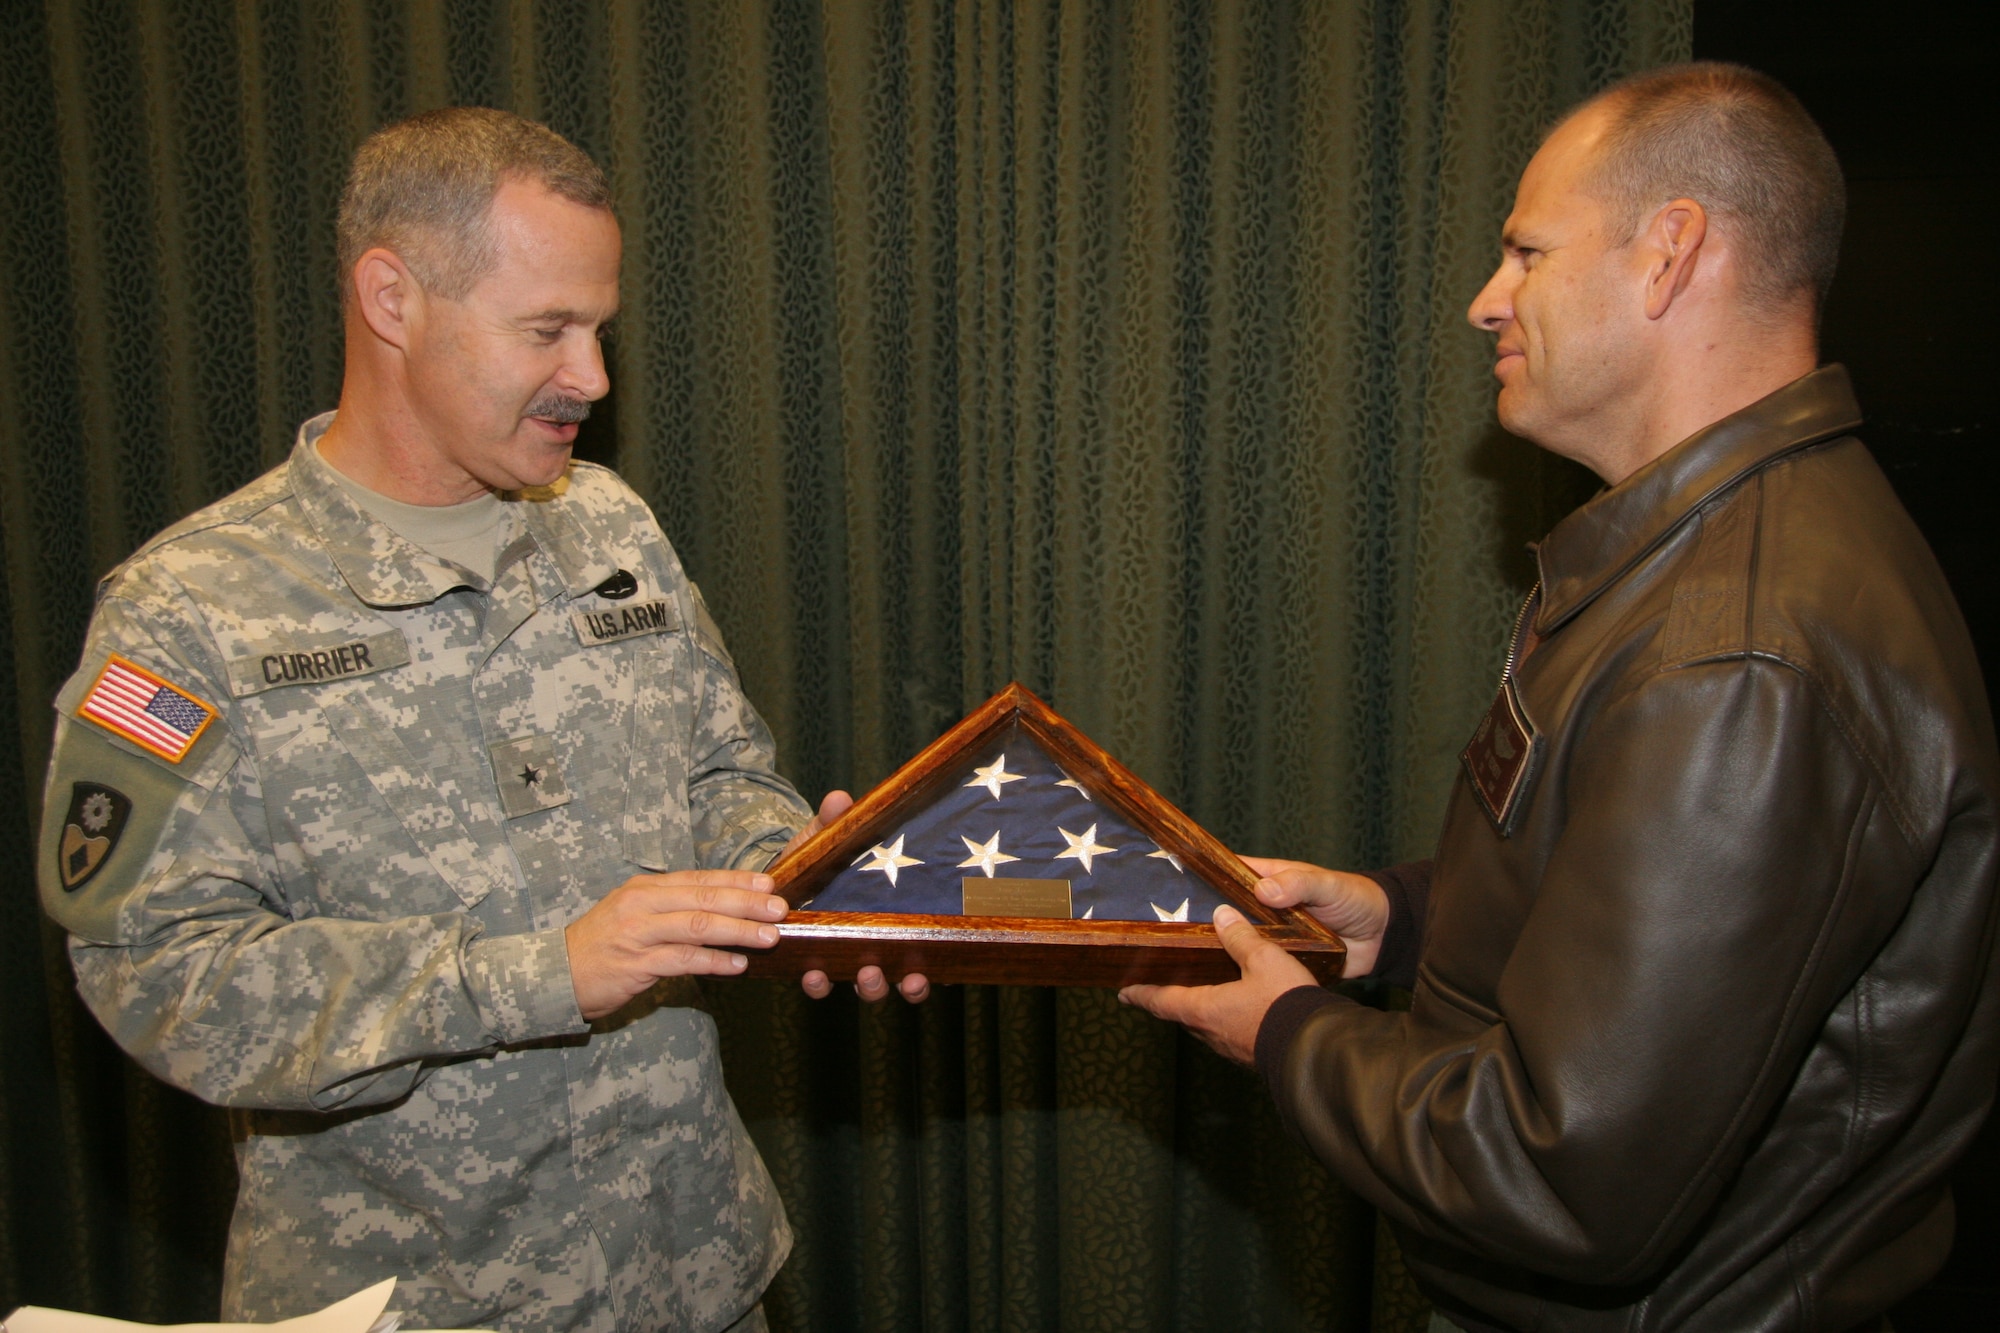 Brig. Gen. Donald Currier (left), 49th Military Police Brigade commander, 
presents Col. James Vechery (right), 60th Air Mobility Wing commander, Nov. 6 
with a token of appreciation for outstanding support from Team Travis for the 
49th MP brigade's homecoming. The Army unit of nearly 100 Soldiers returned 
Aug. 10 after a one-year deployment to train the Iraqi police. California Gov. 
Arnold Schwarzenegger joined Team Travis to welcome home the Soldiers. Team 
Travis worked for several weeks with the California National Guard to ensure 
the welcome home reception allowed for more than 400 family members to greet 
their returning Soldiers as they exited the plane at Travis Air Force Base.
